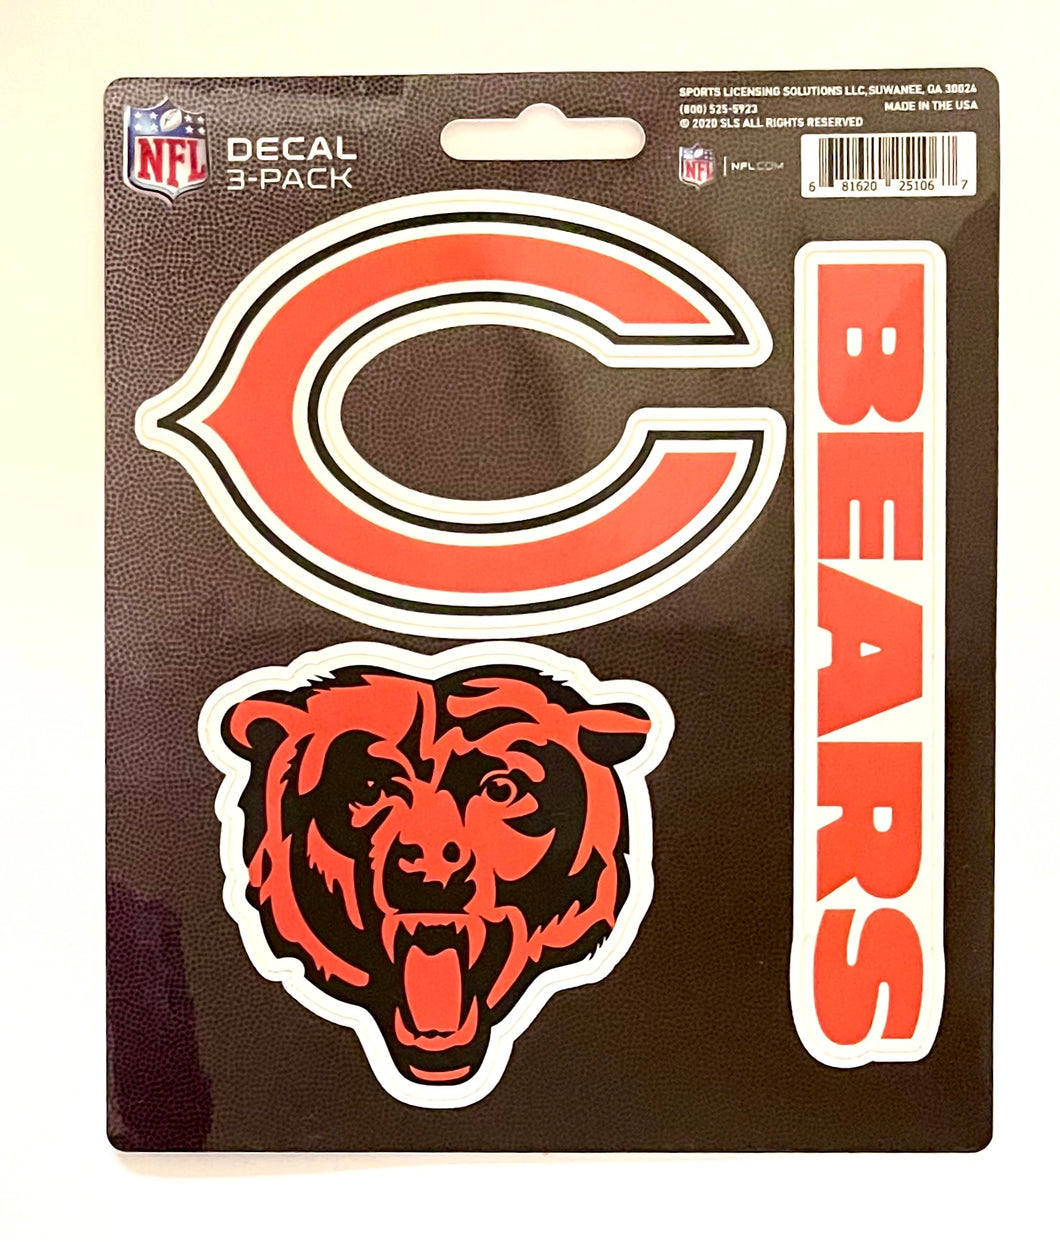 Chicago Bears NFL 3-Pack Decals